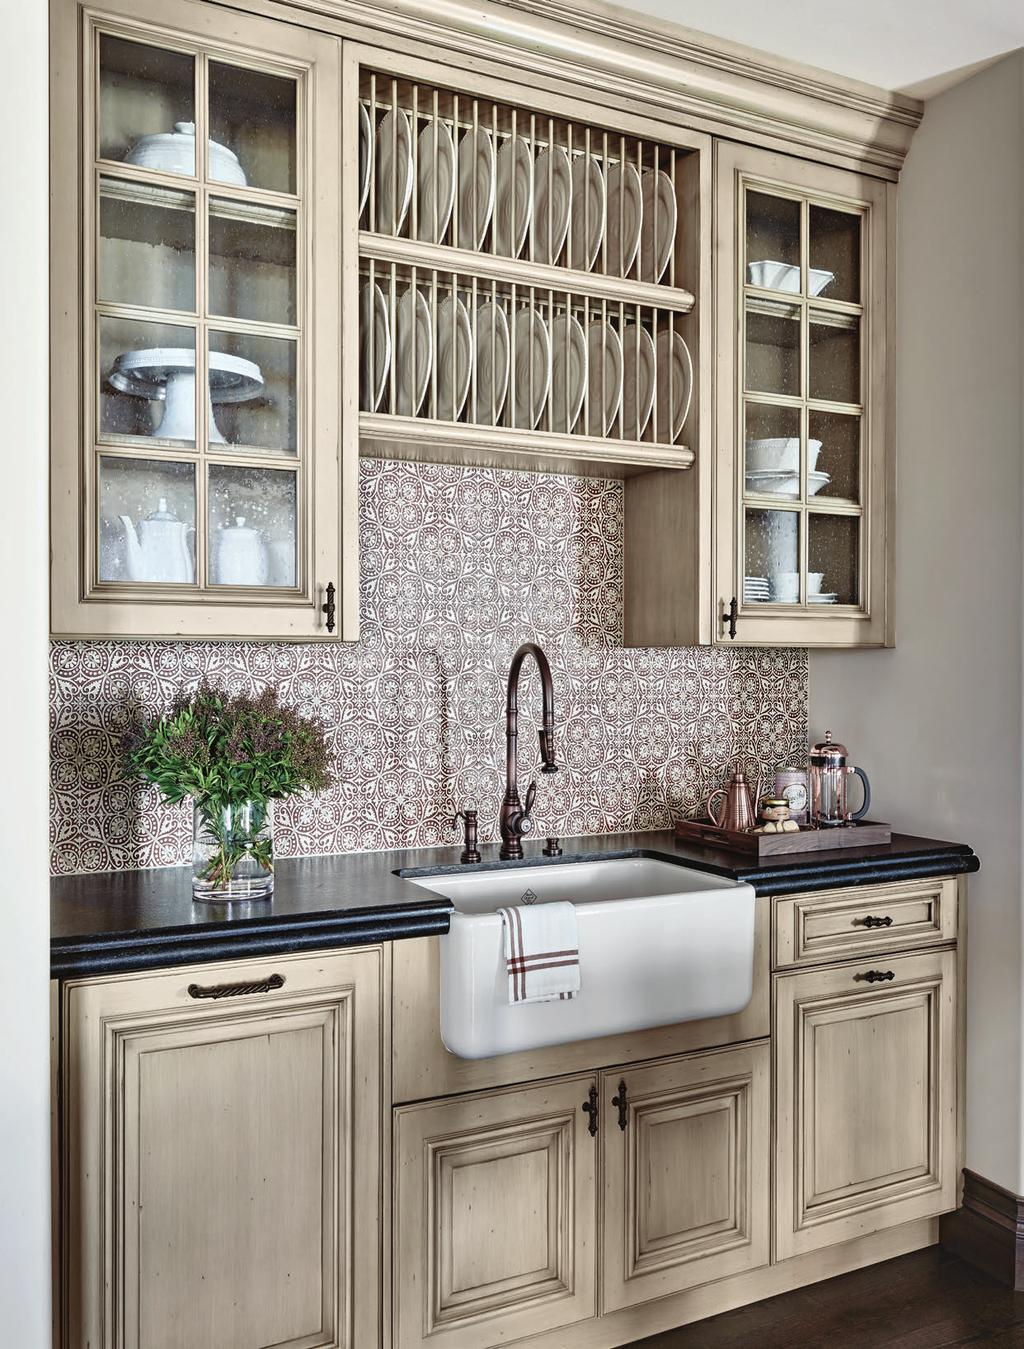 THIS PHOTO: A second apron-front sink in a run of cabinets is just steps from the outer island.